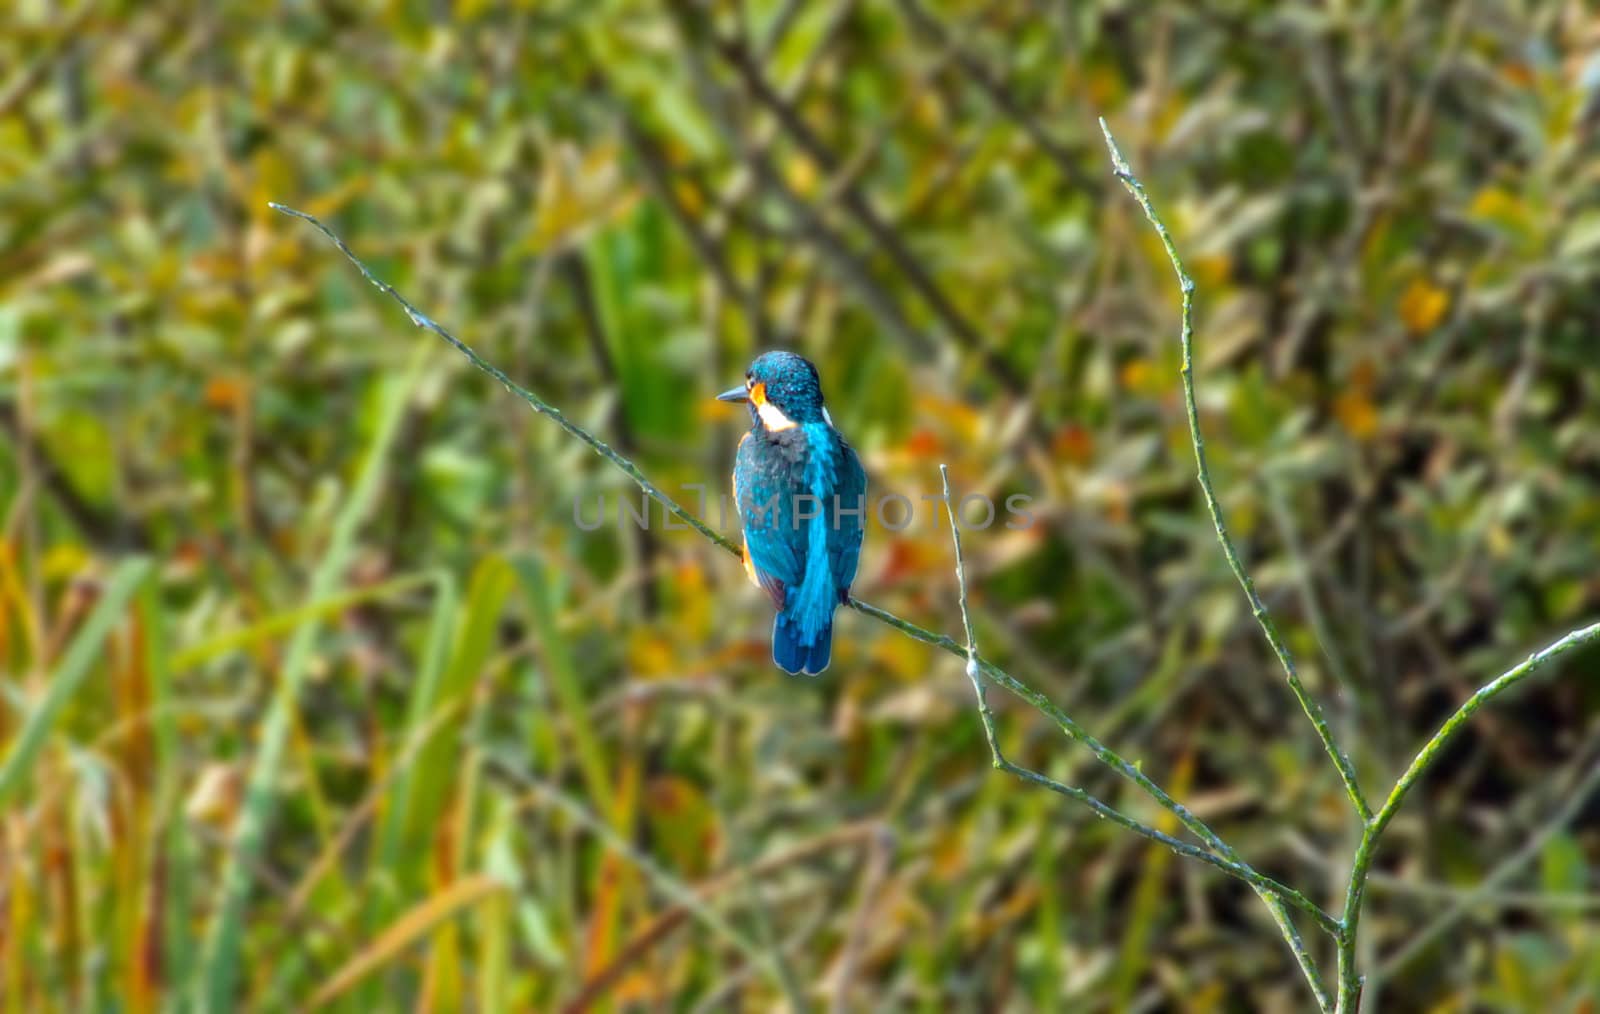 Blue kingfisher on a twig with greenery as background